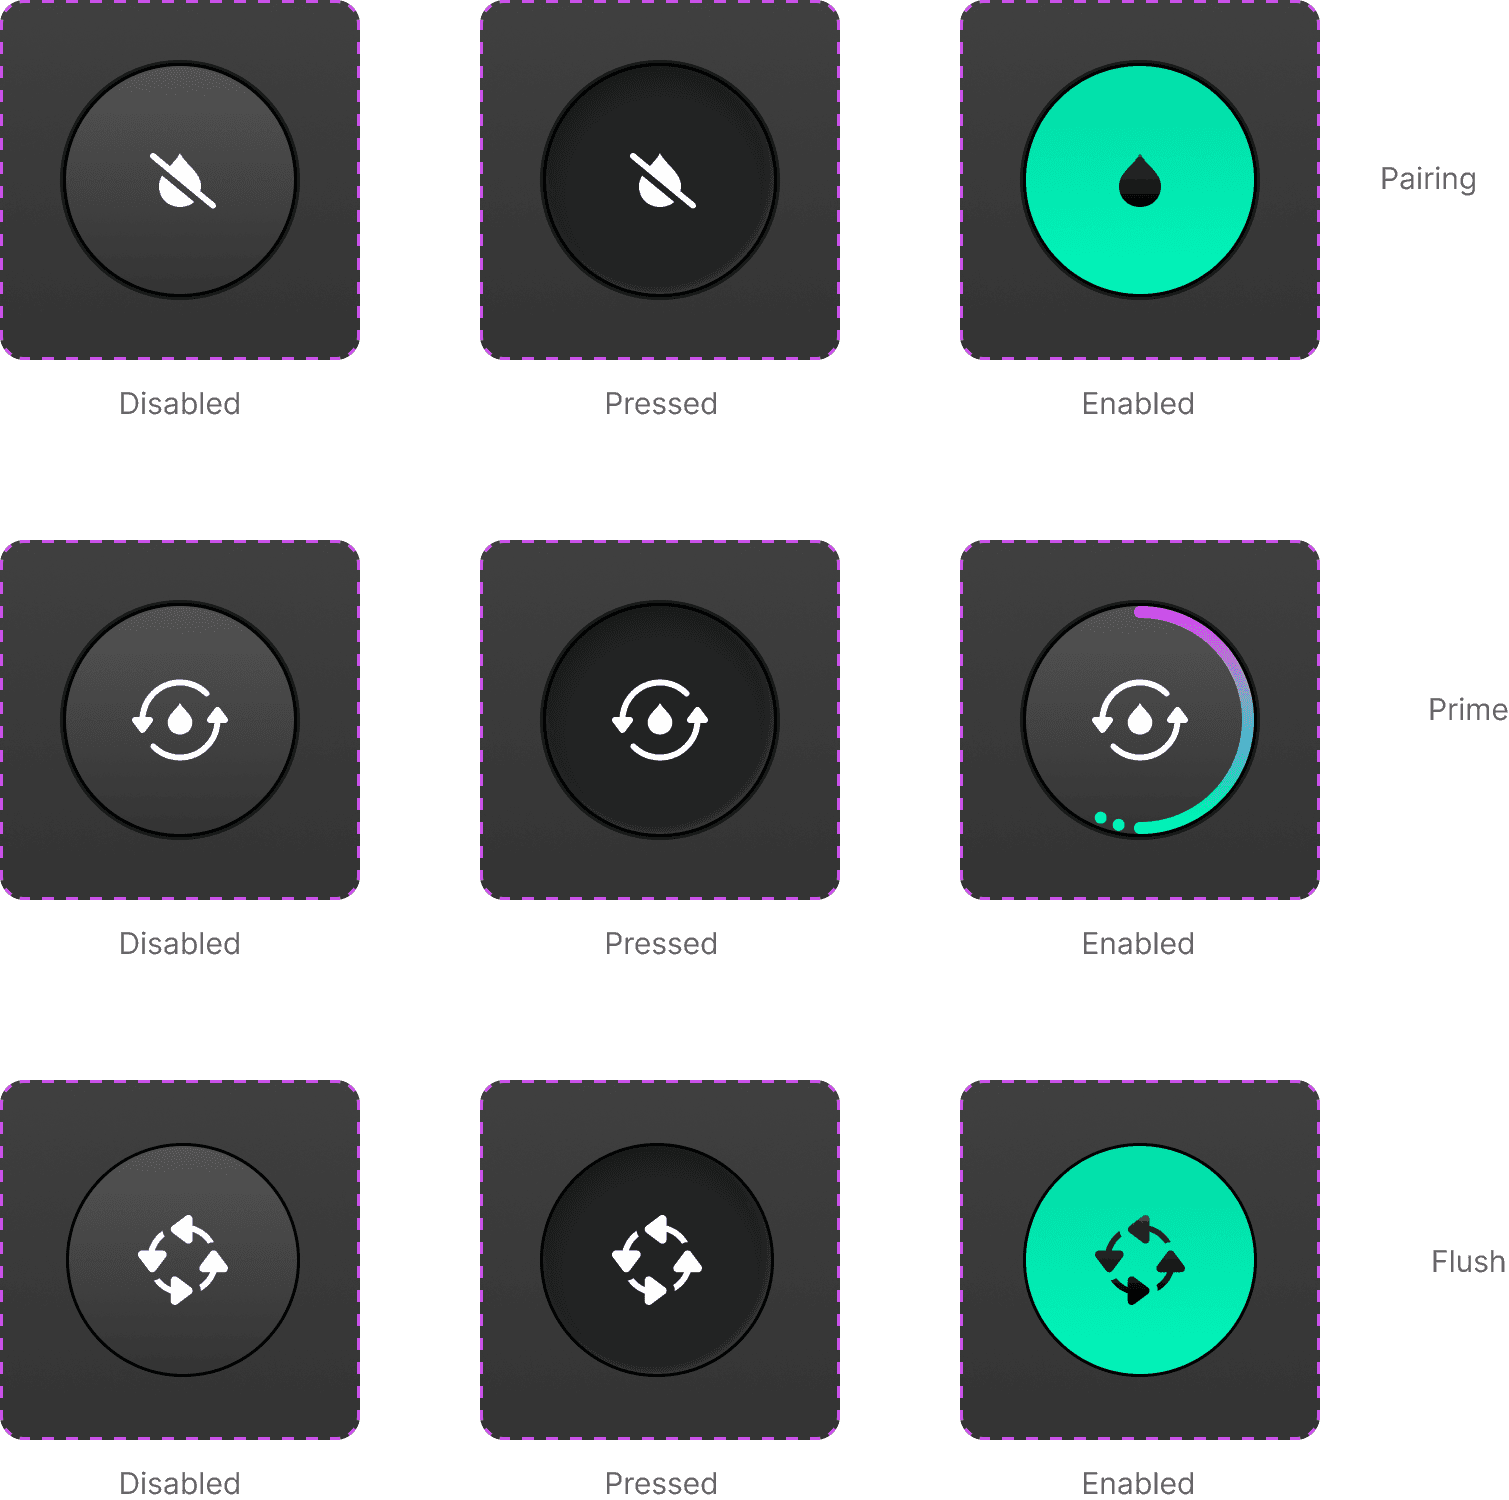 Excerpt showing icons and buttons from the design system of an ultrasonic cutter.